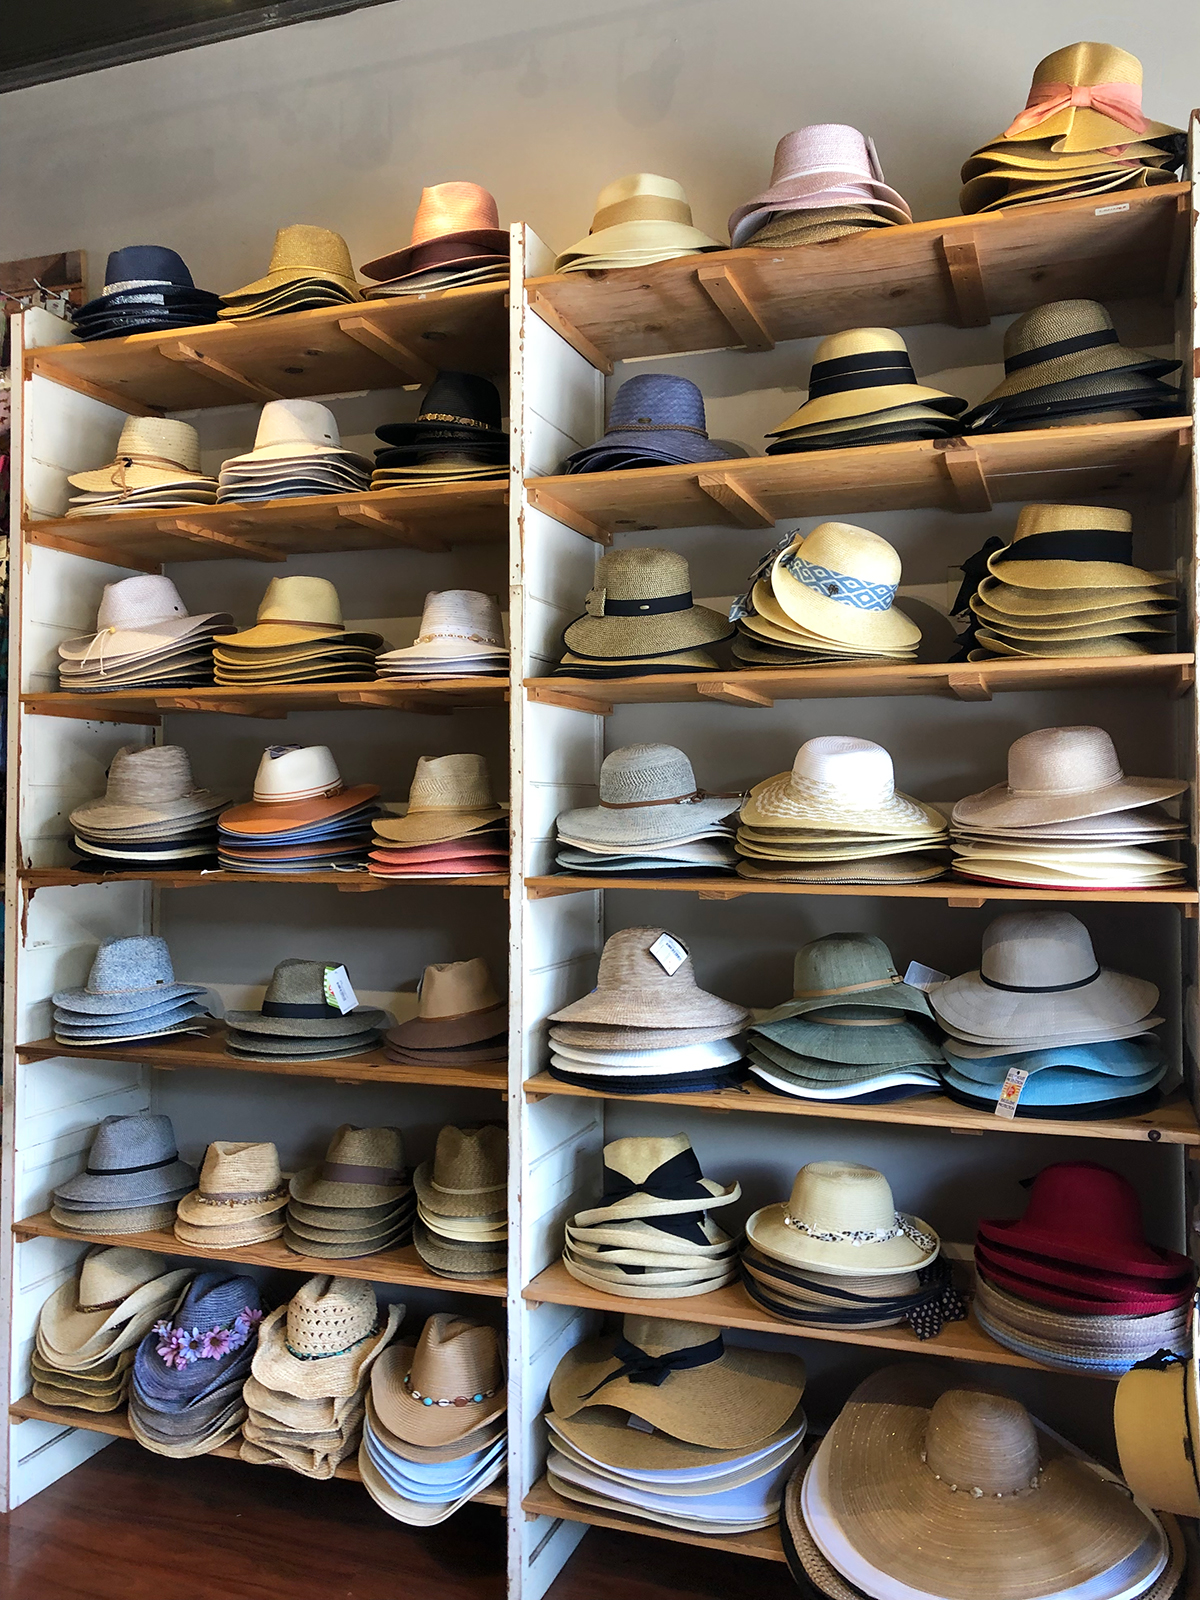 hats stacked on shelves in Lahaina store